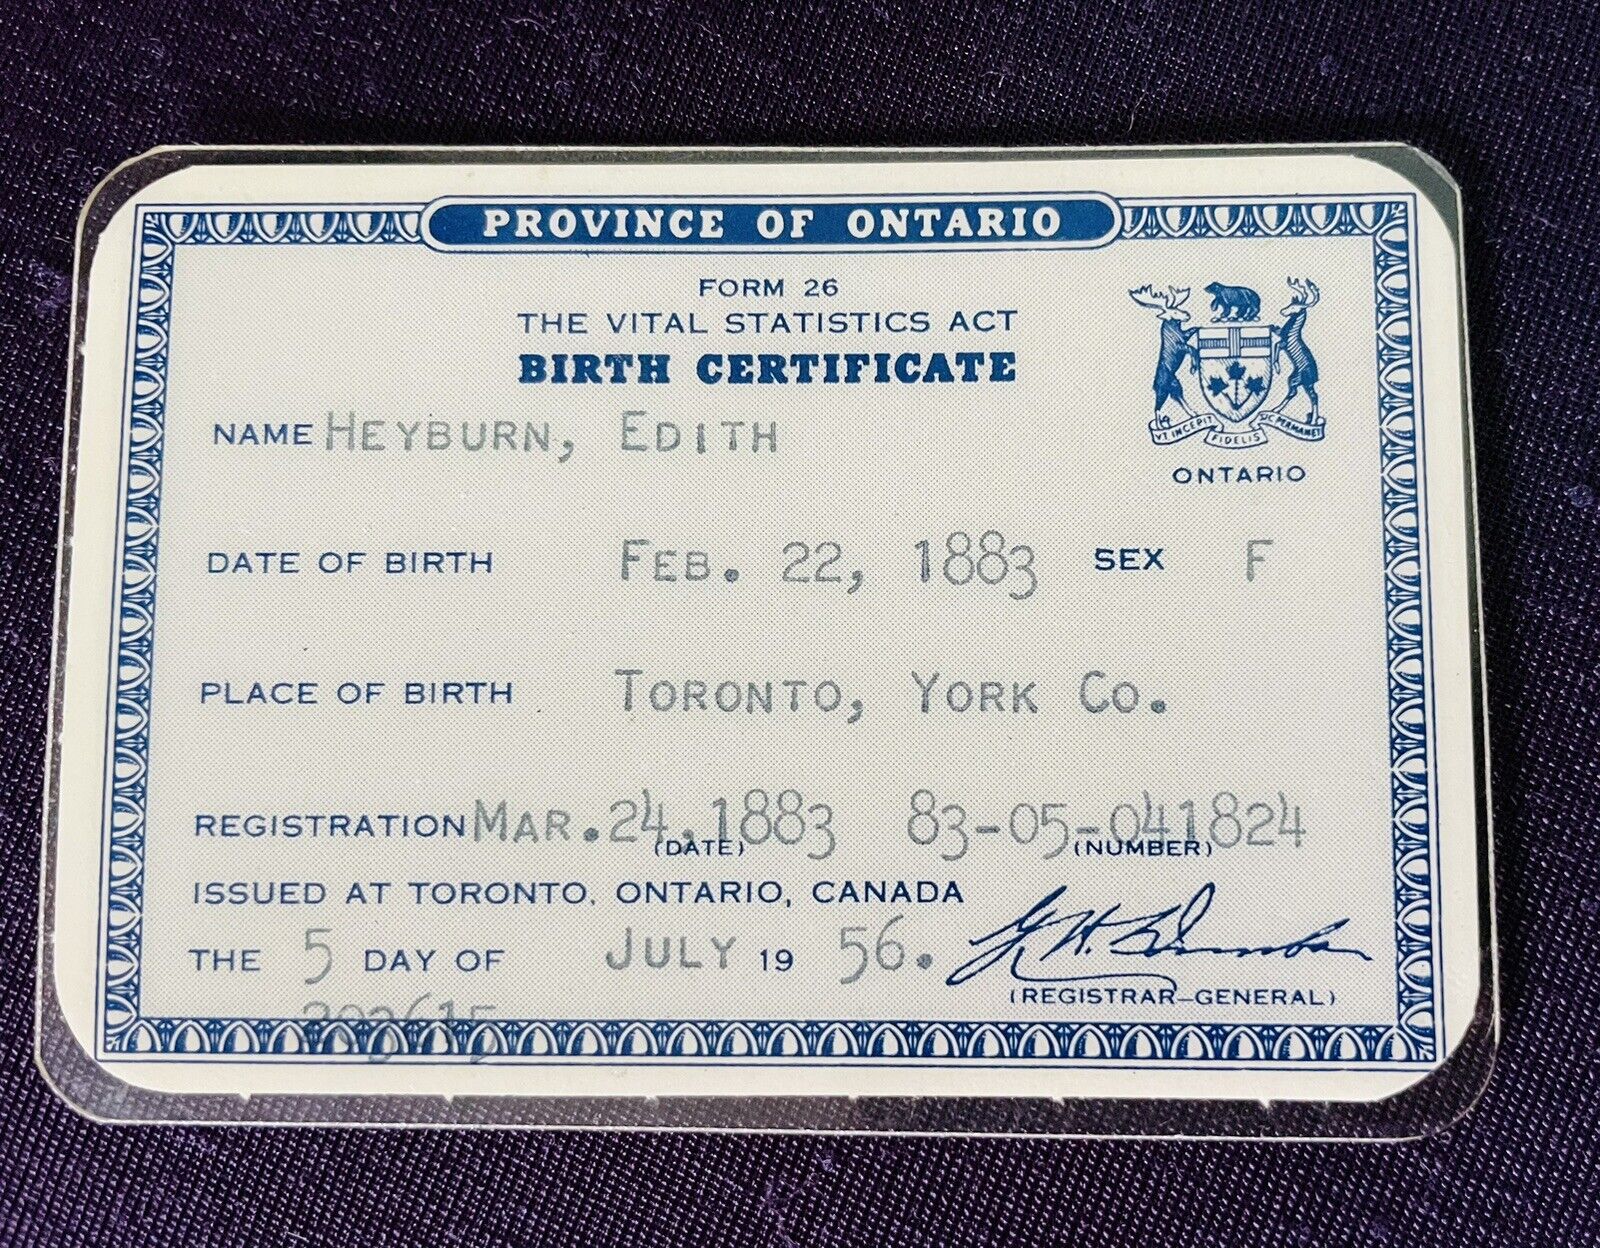 Vintage 1956 Laminated Card of 1883 Birth Certificate - Province of Ontario